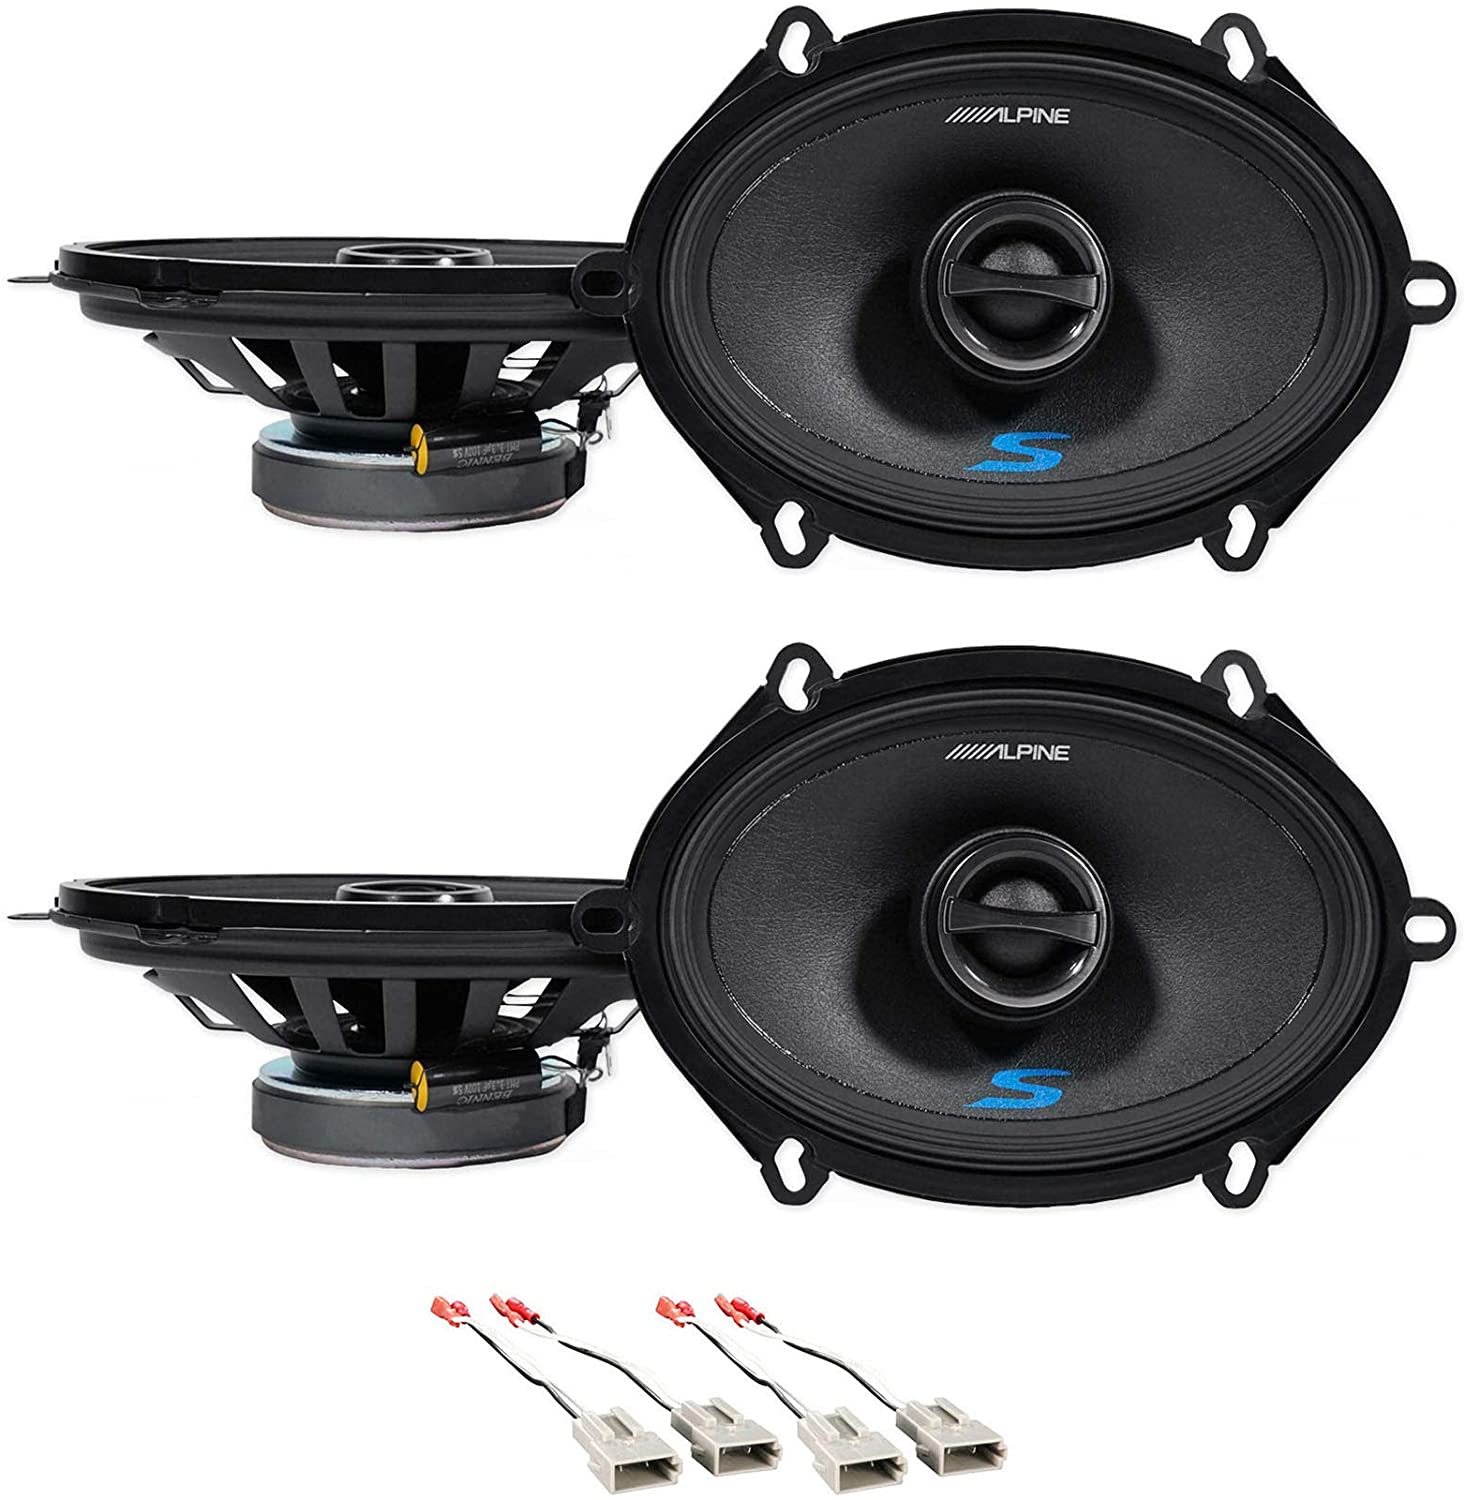 Front+Rear Alpine S 5x7" Factory Speaker Replacement Kit For 1993-1997 Mazda MX6